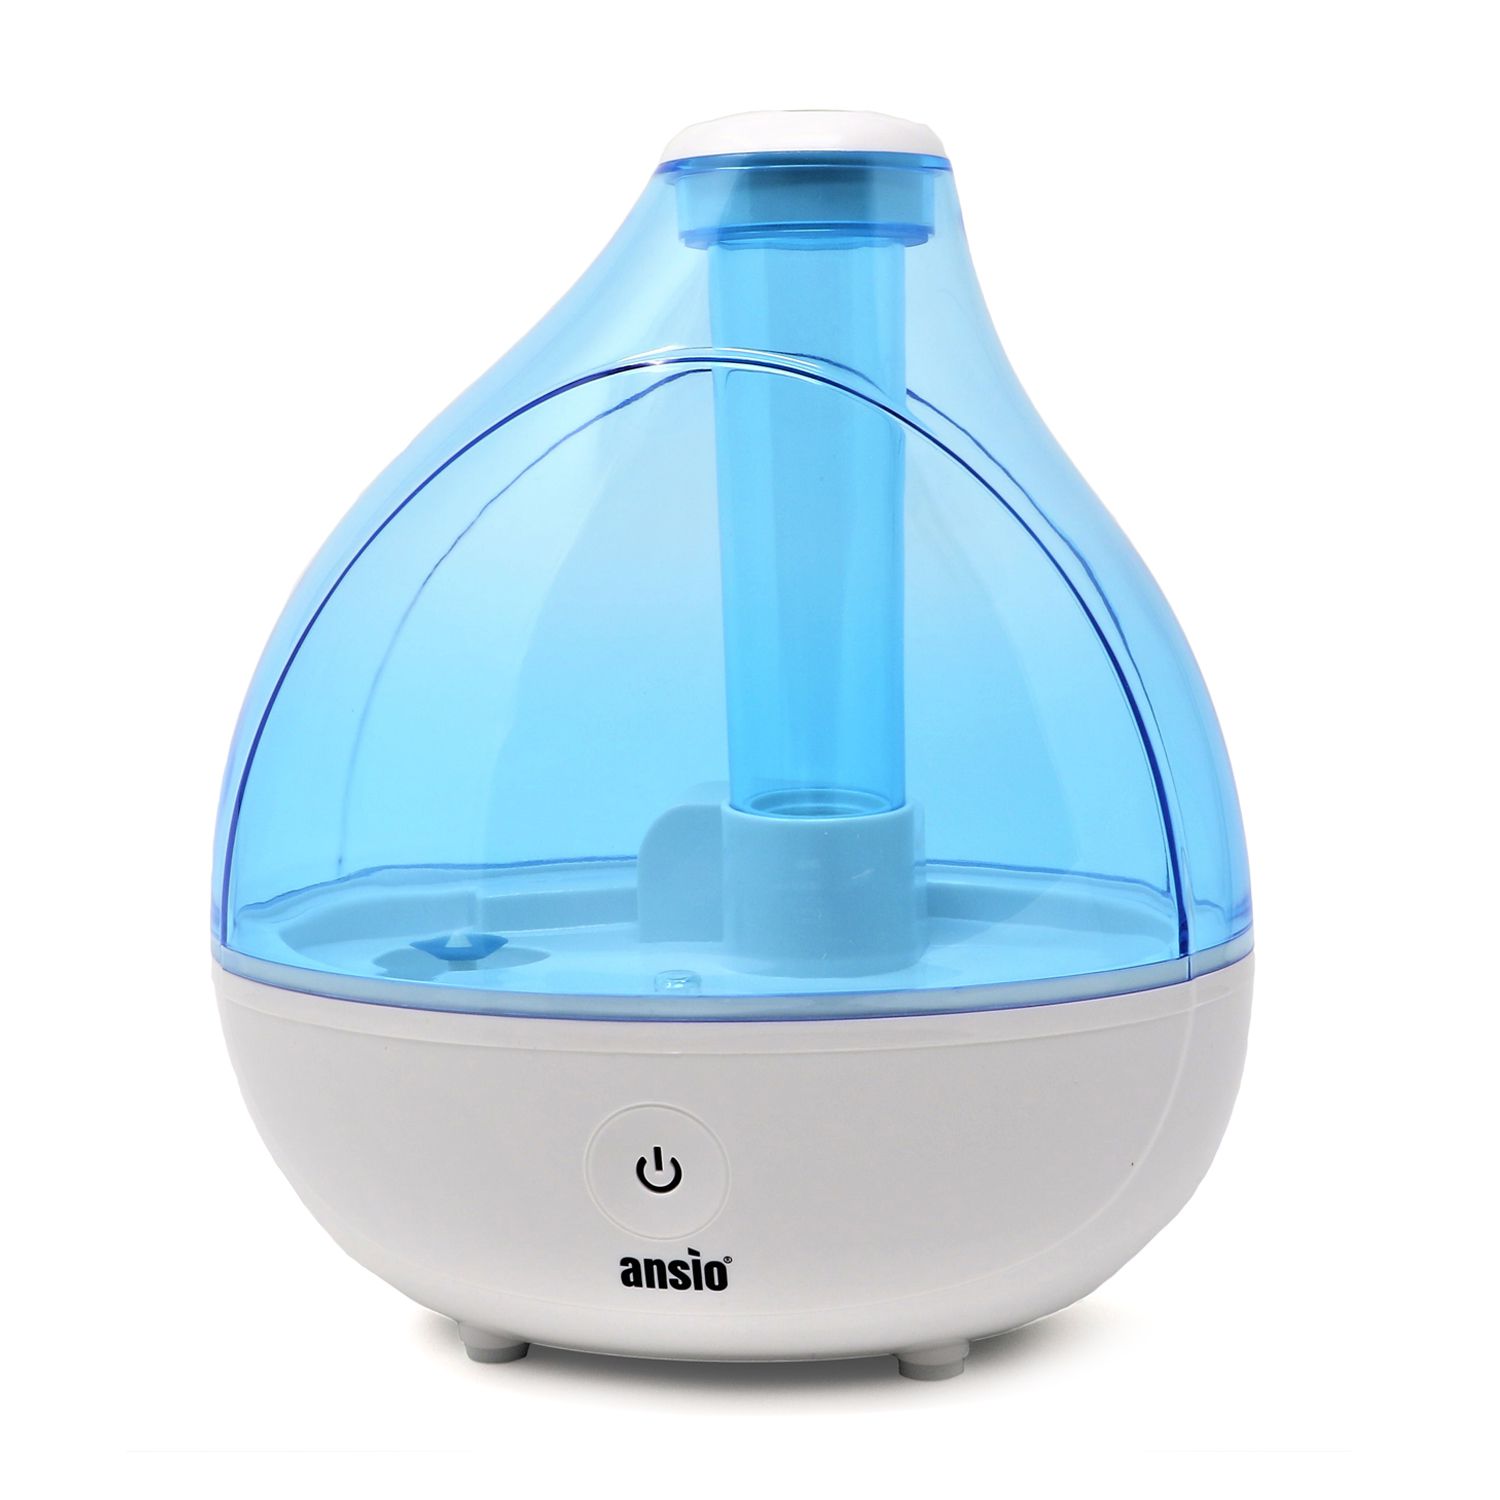 ANSIO 94352 Humidifier Price in India - Buy ANSIO 94352 Humidifier ...